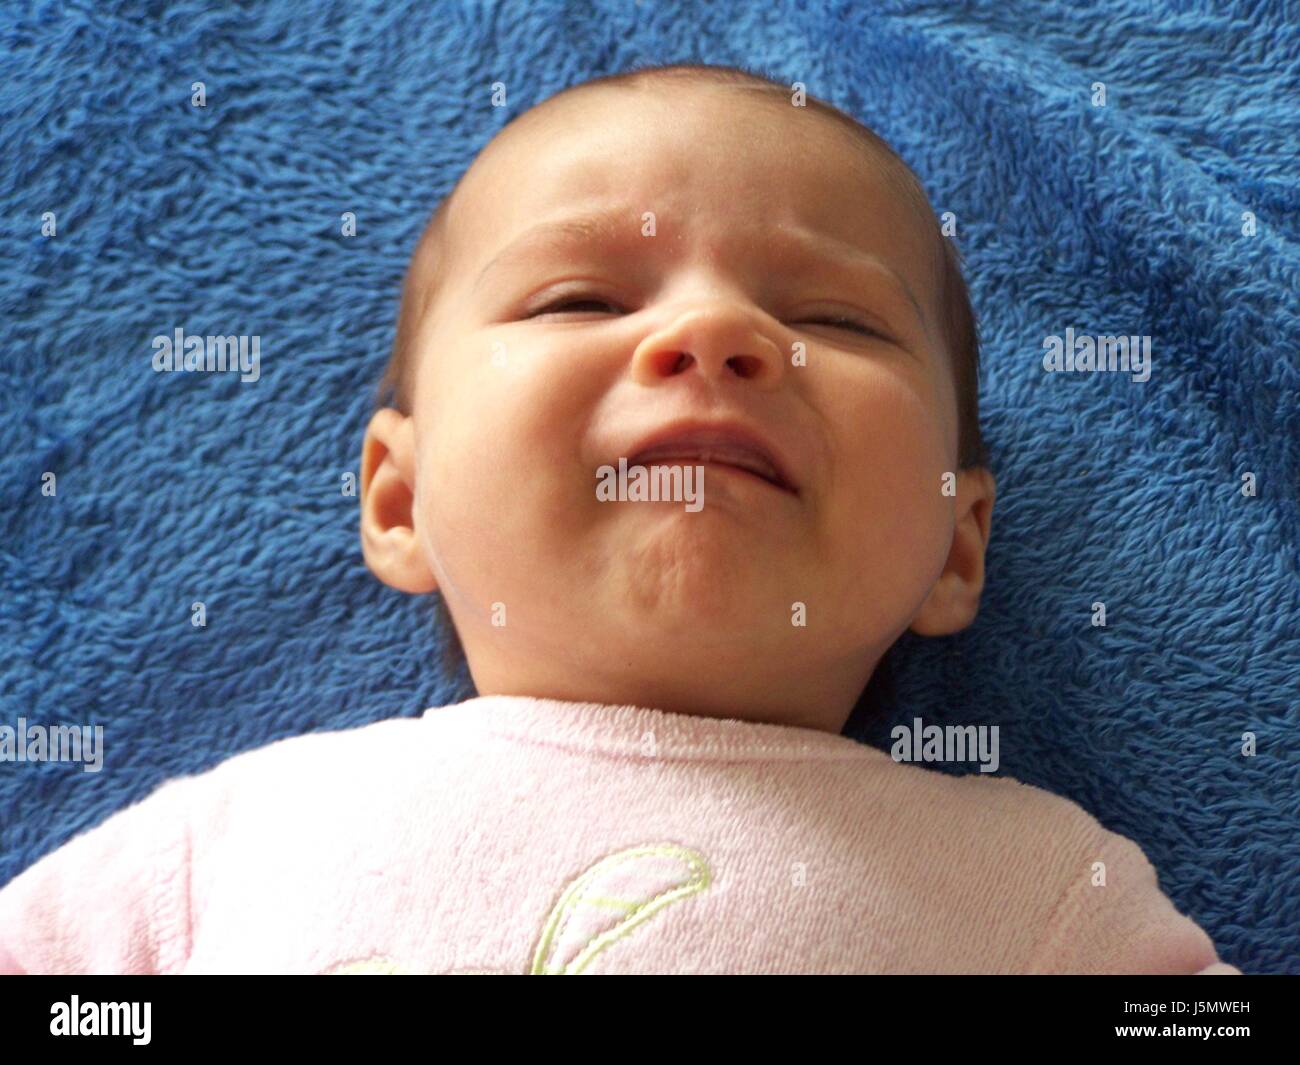 baby frustrated cub weep cry crying weeper weeping discontentment knatschen Stock Photo